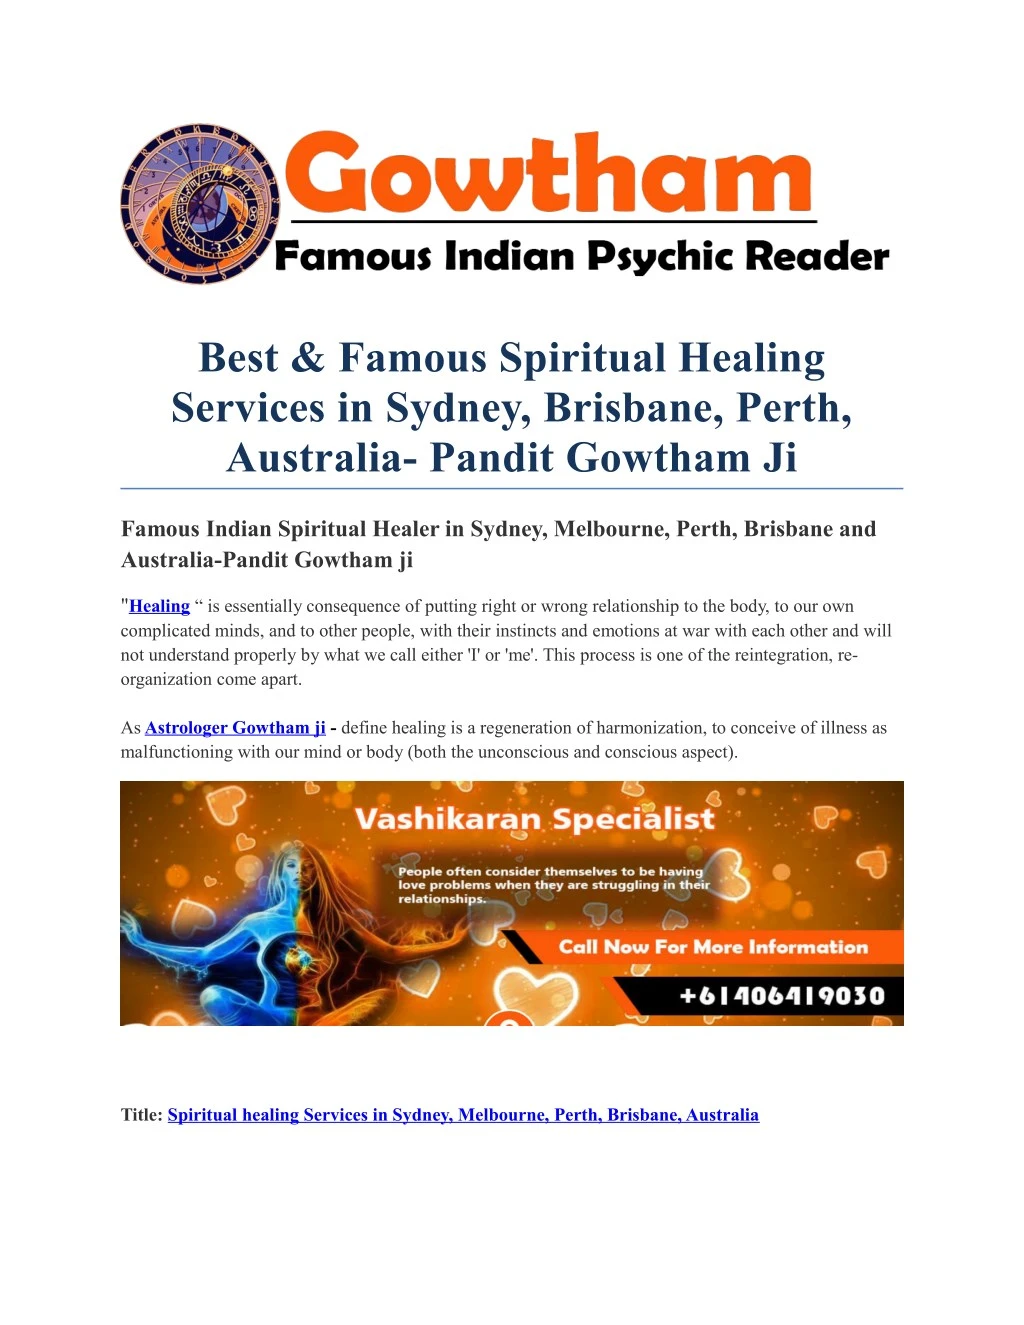 best famous spiritual healing services in sydney